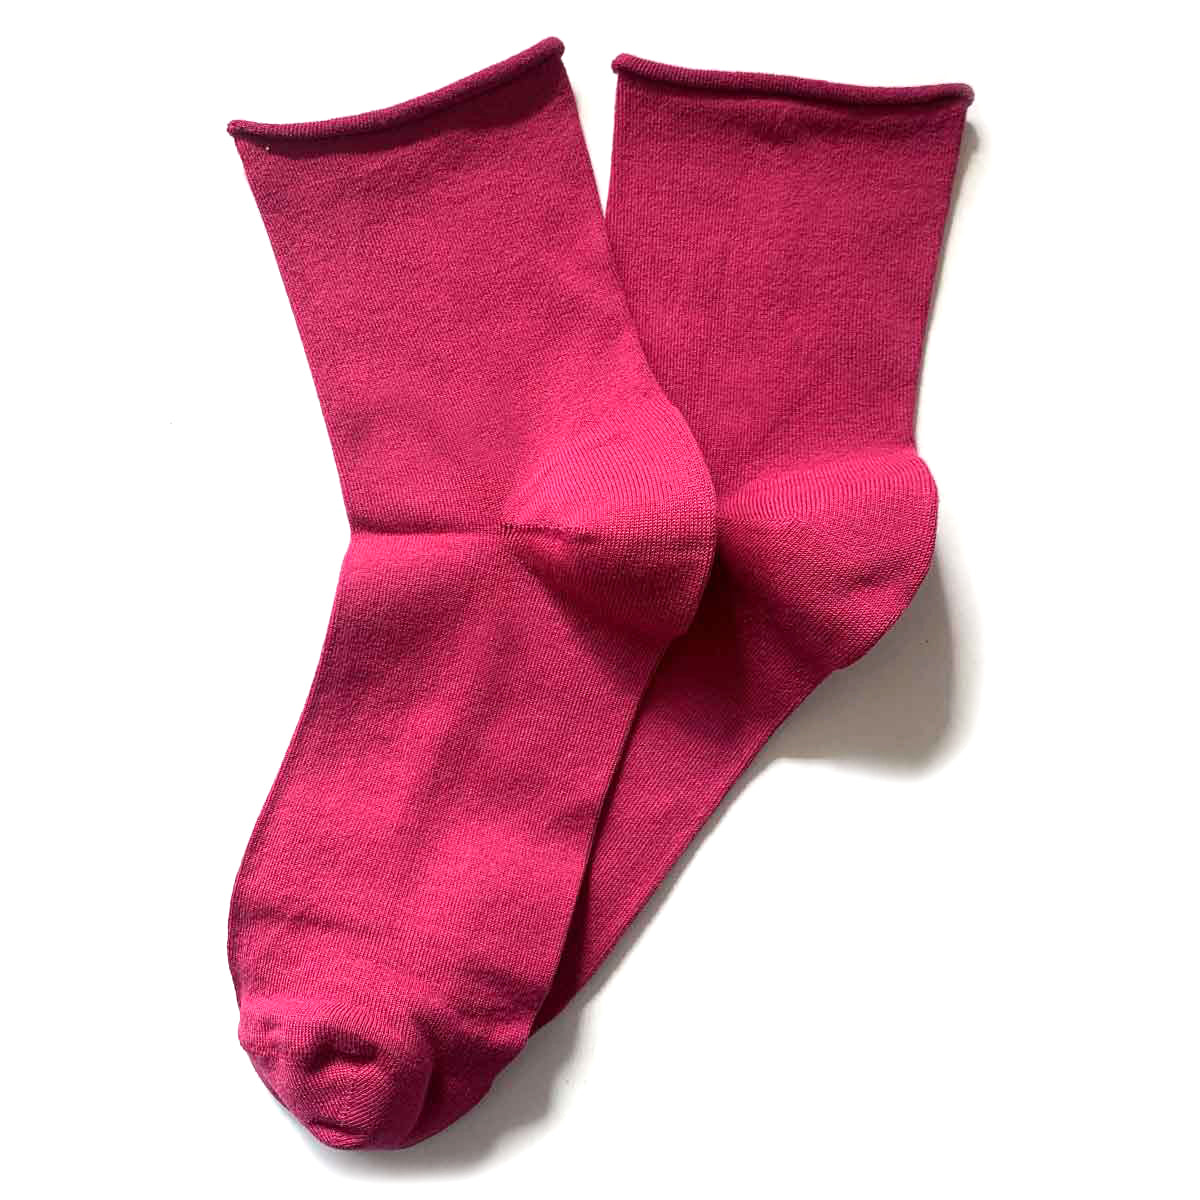 Soft 82% cotton socks with a rolled hem - socks that don't tighten